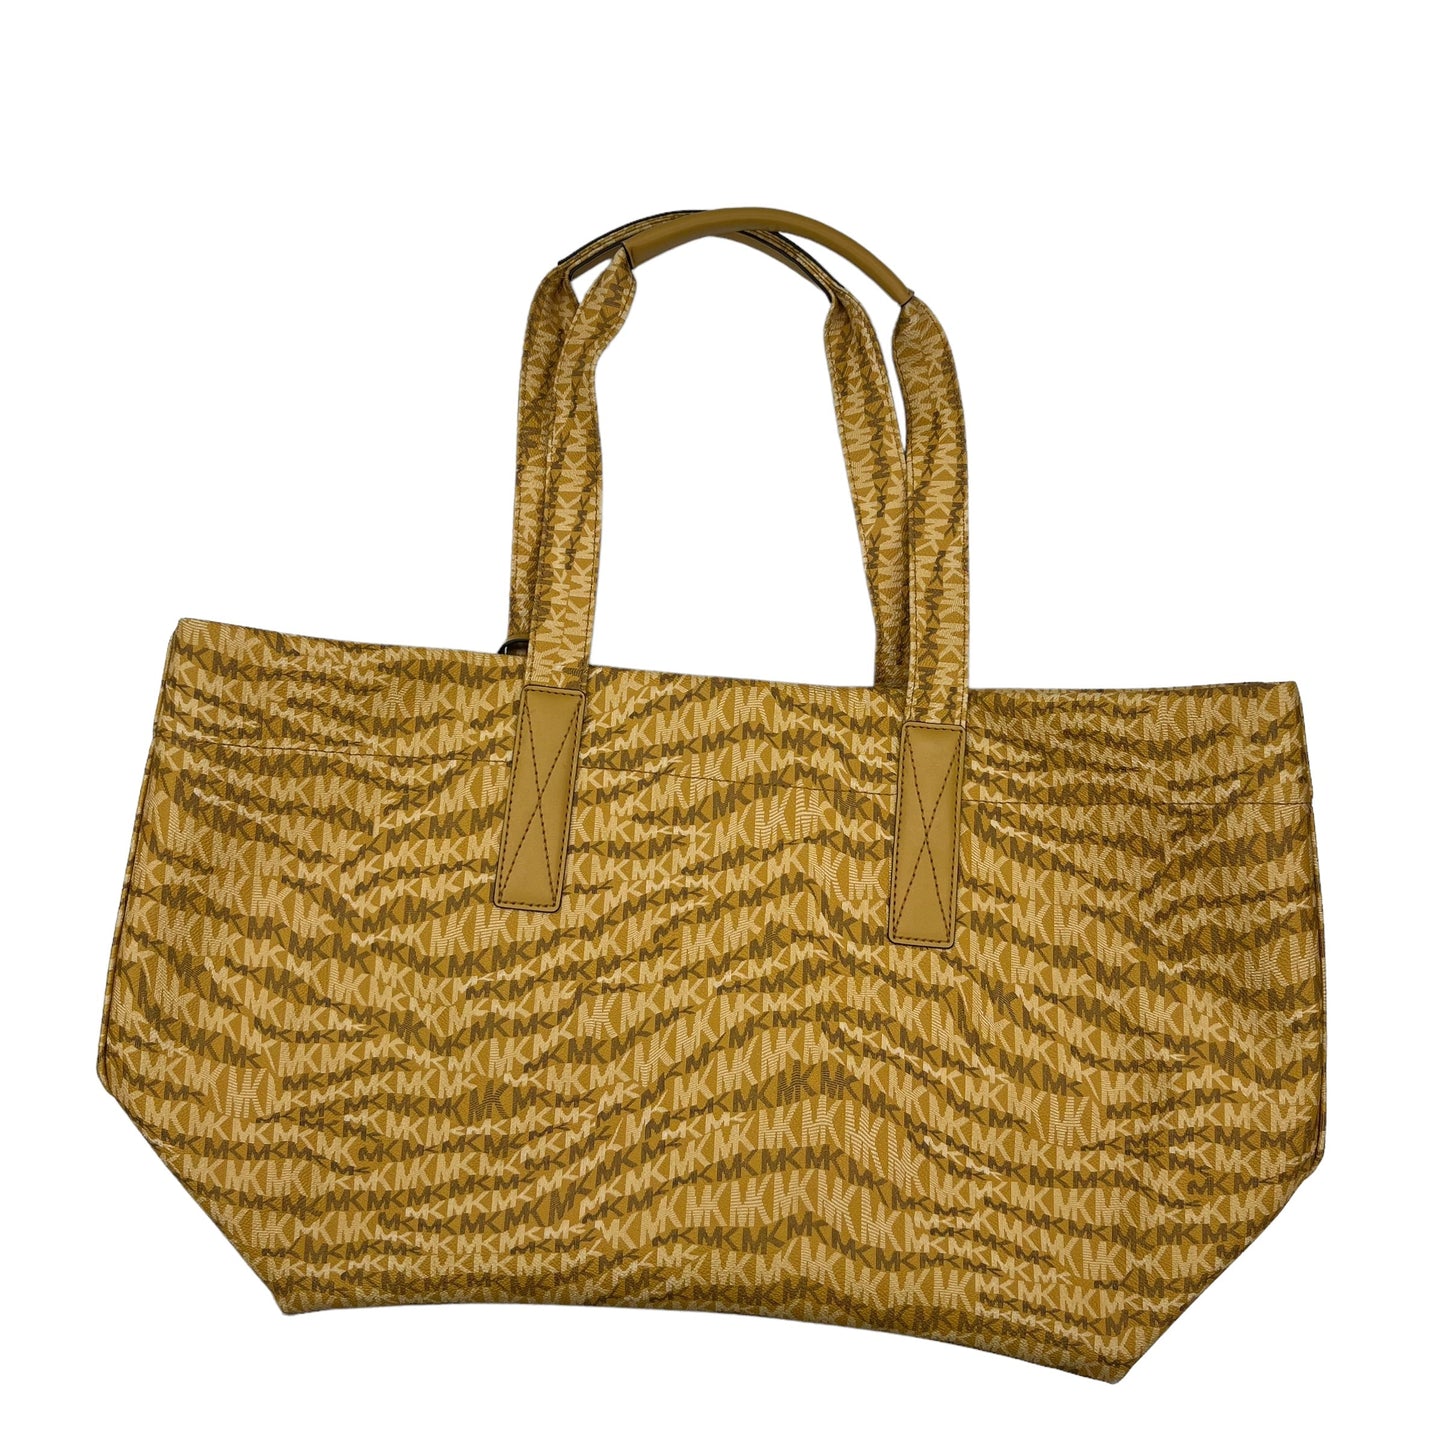 Tote Designer By Michael Kors  Size: Large